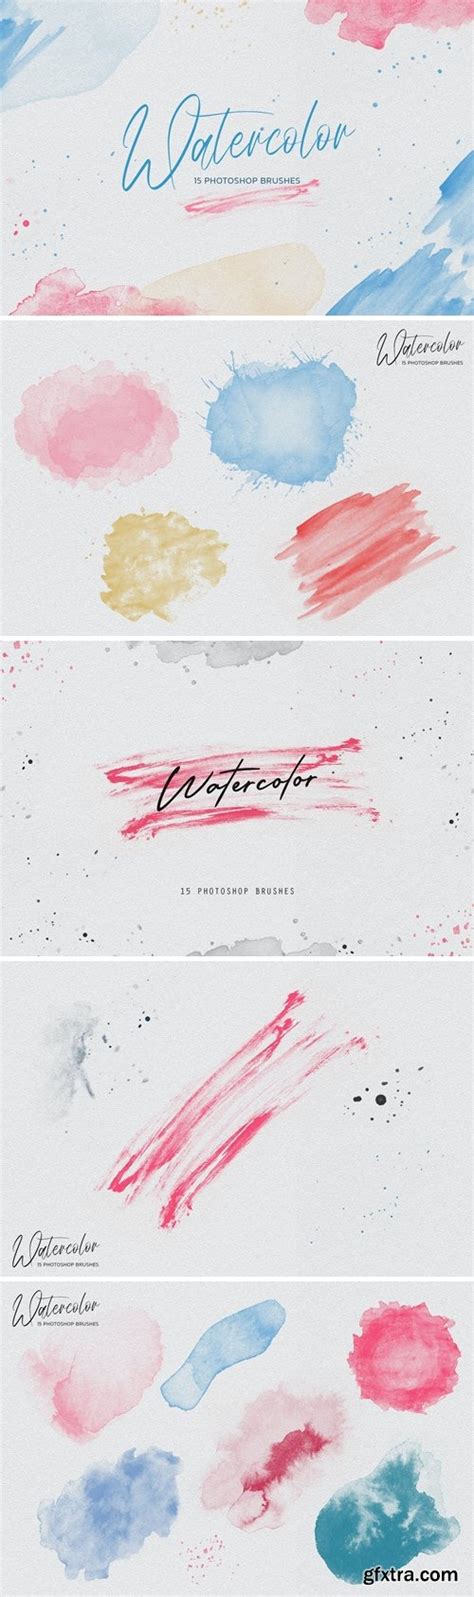 Watercolor Photoshop Brushes Gfxtra